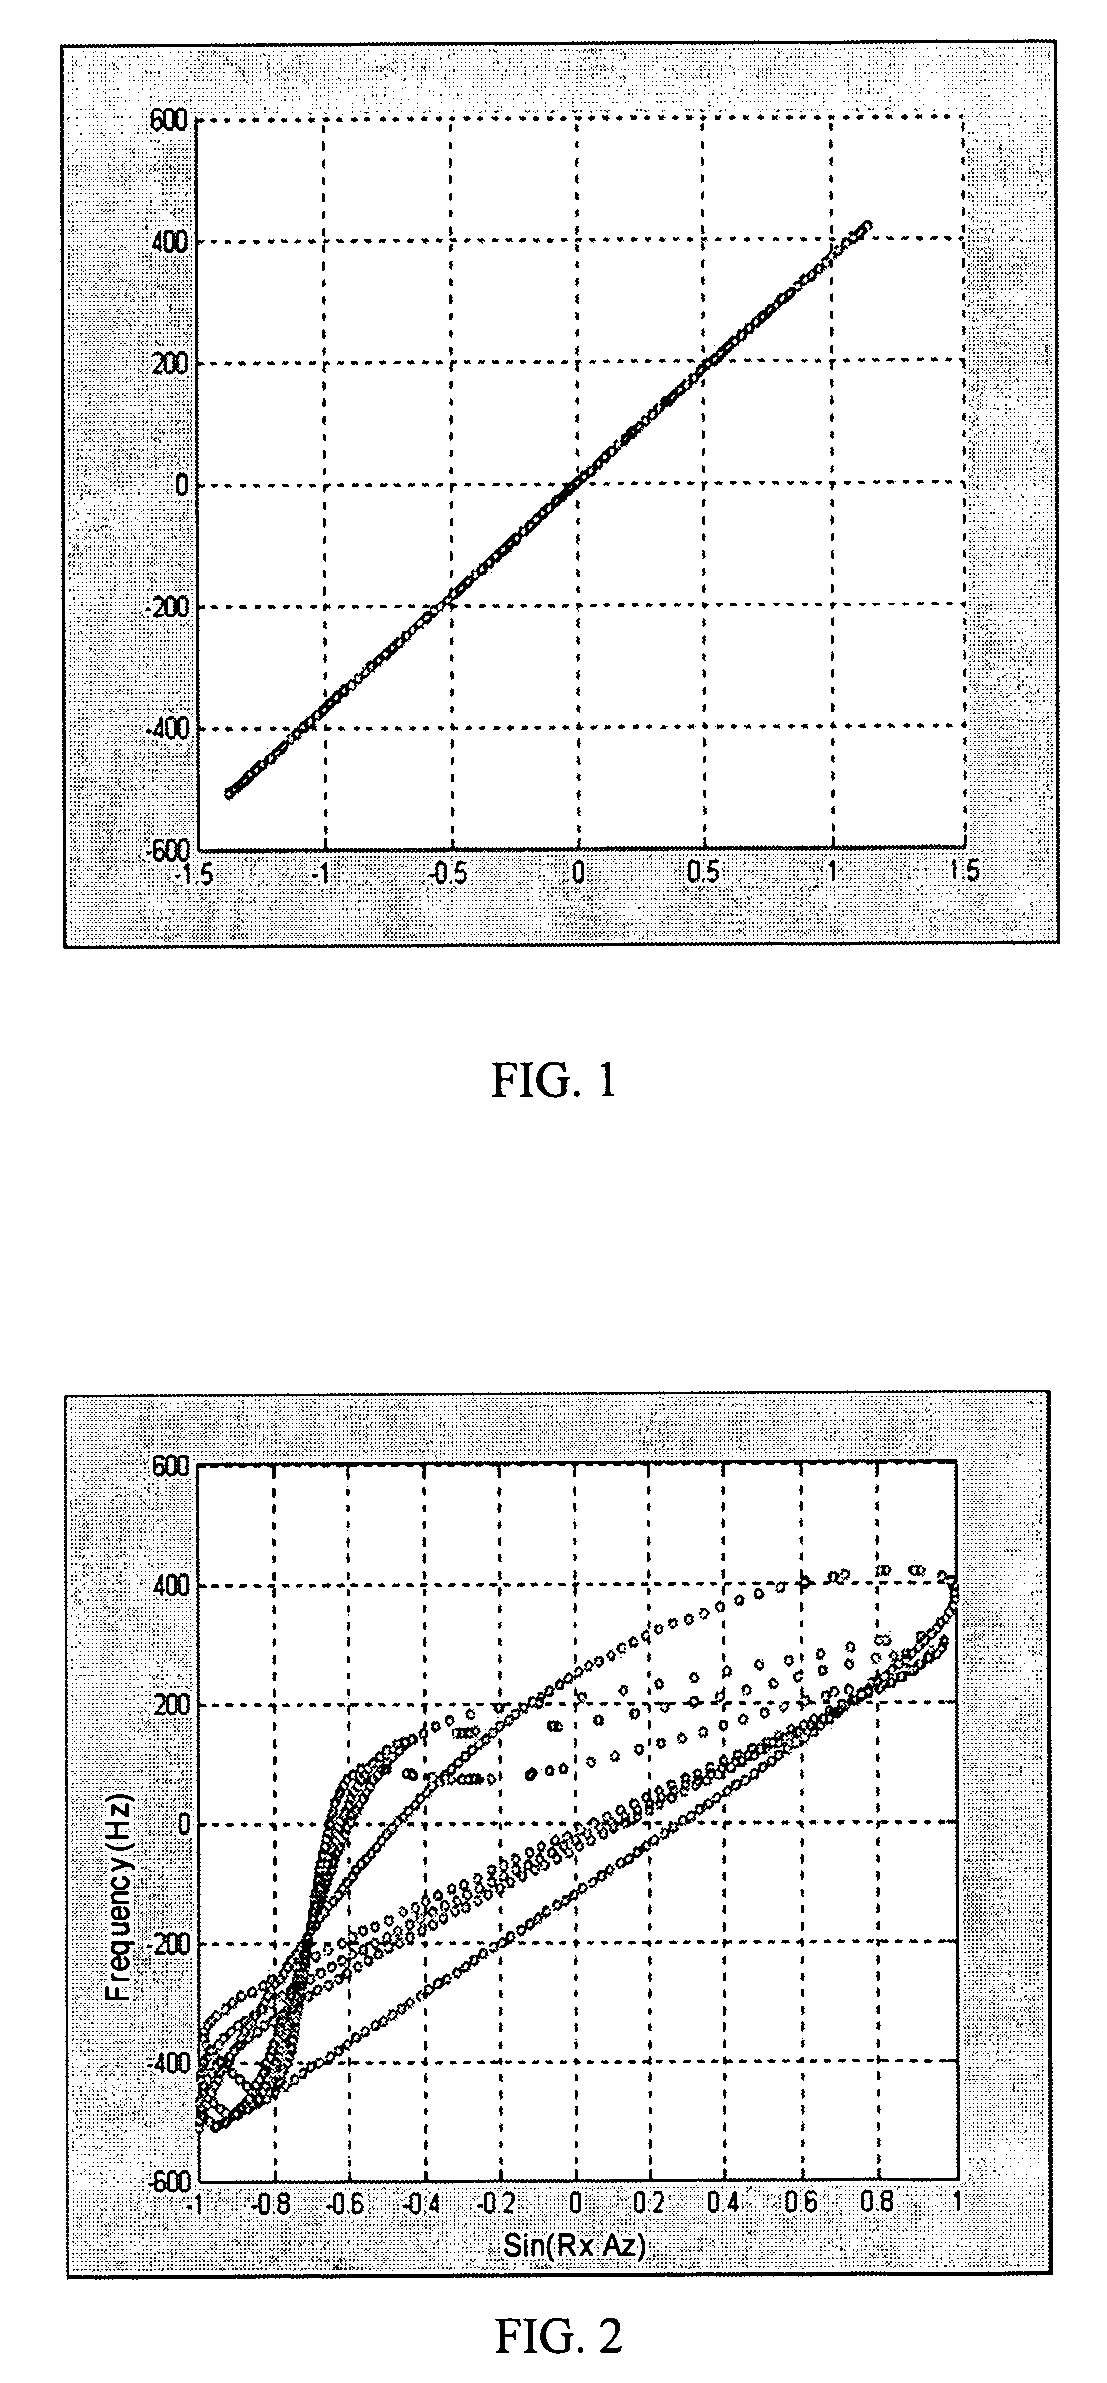 Method and apparatus for performing bistatic radar functions